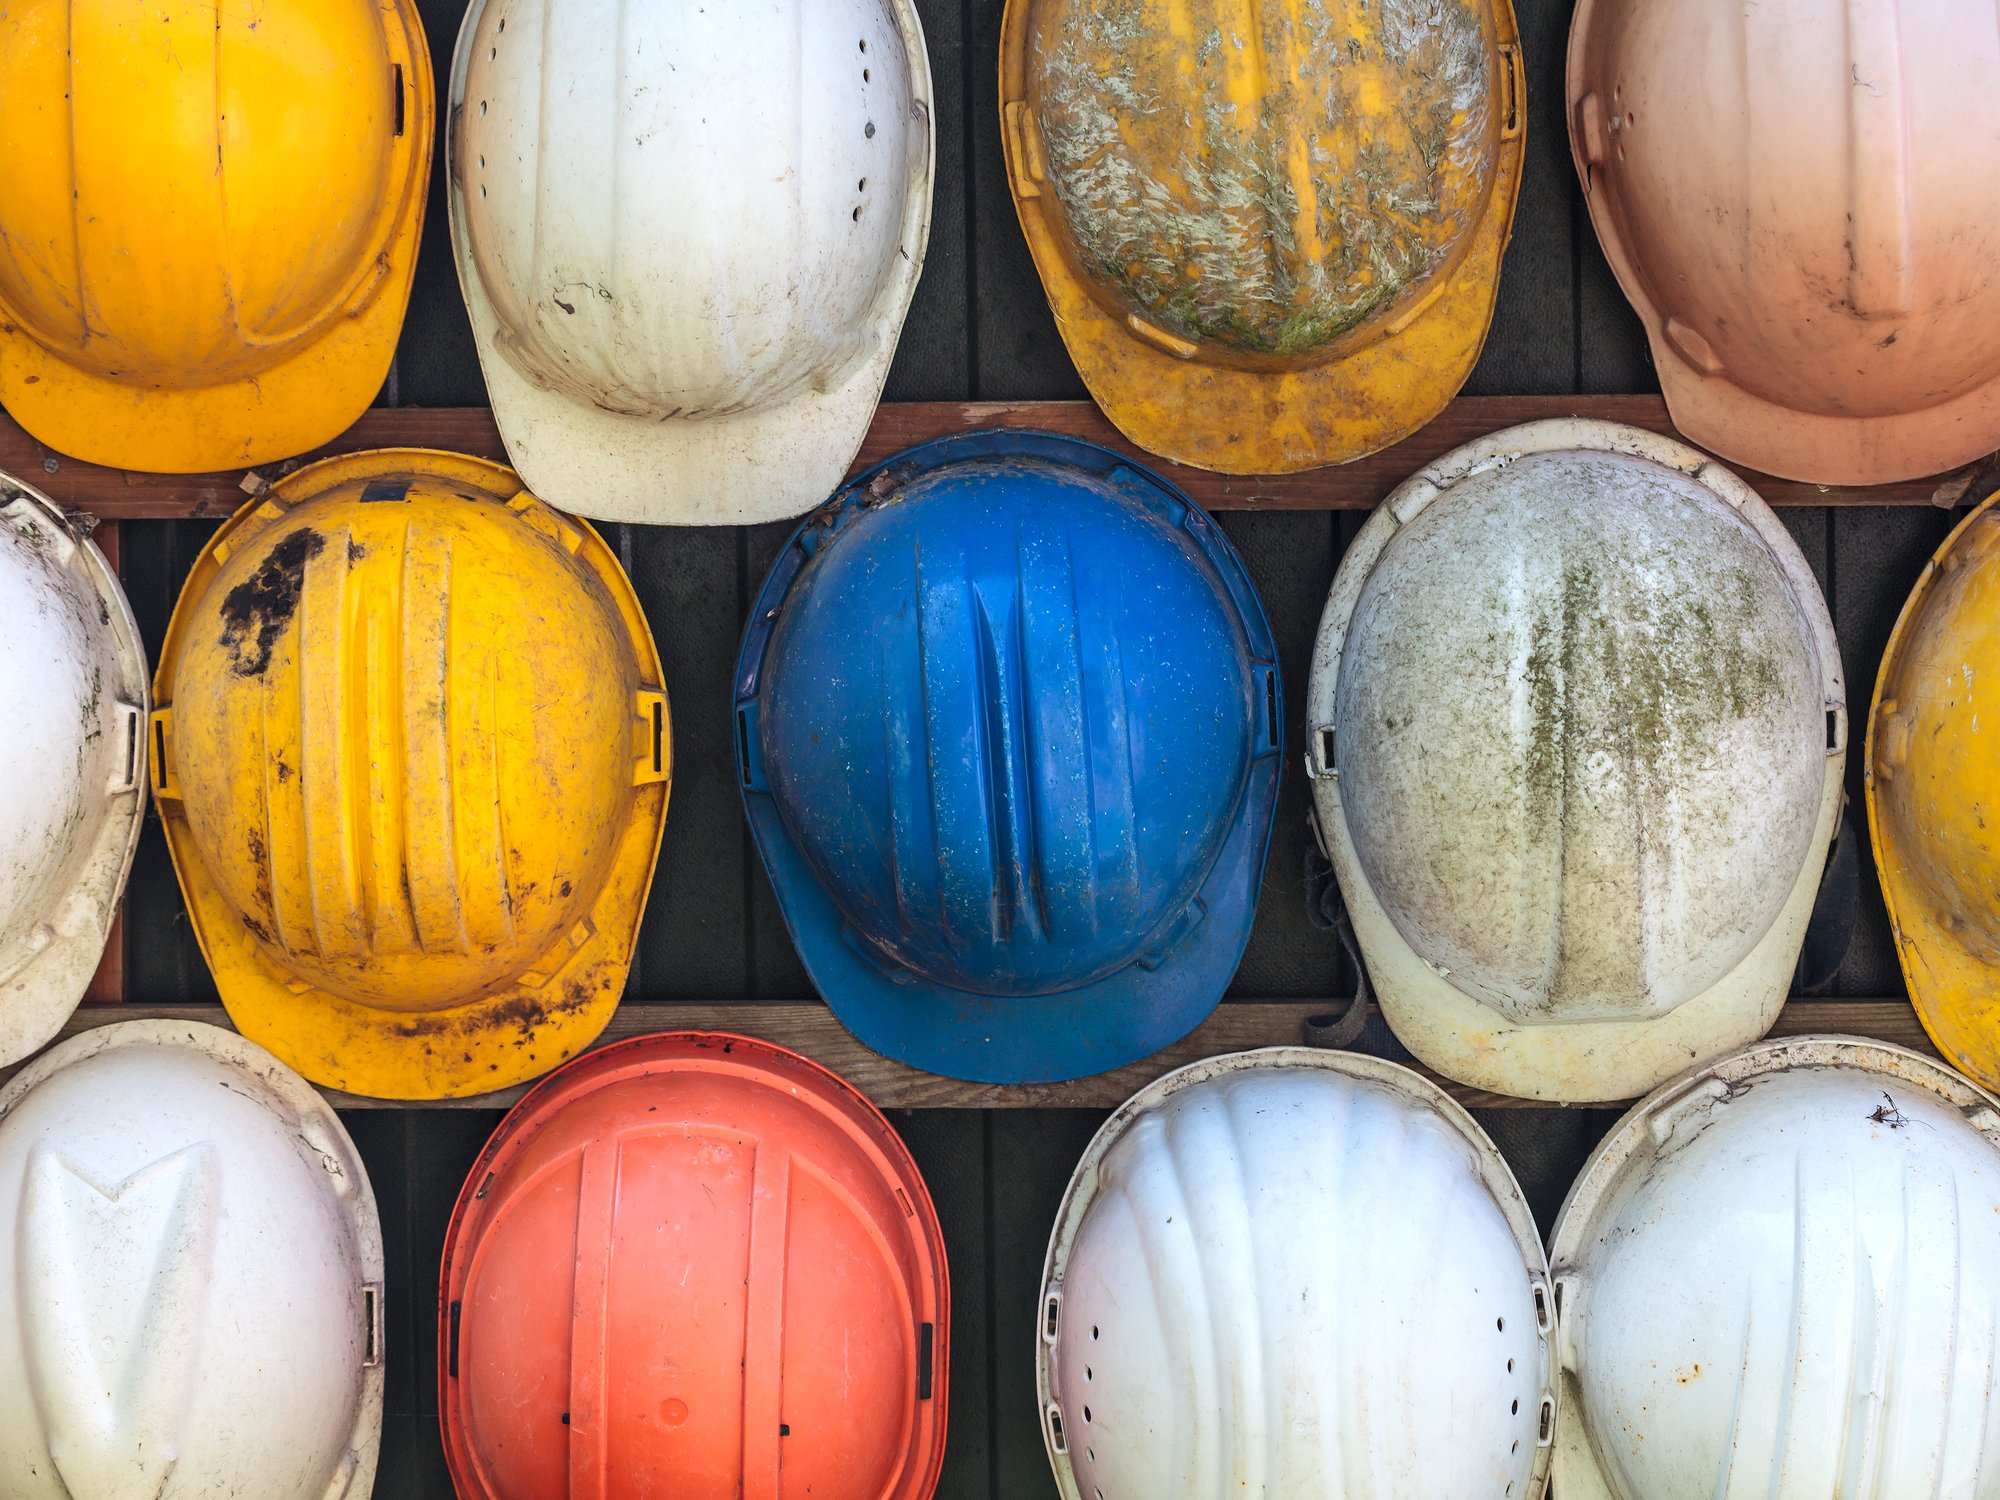 The 7 KPIs of Construction Safety: Metrics to Measure on the Job